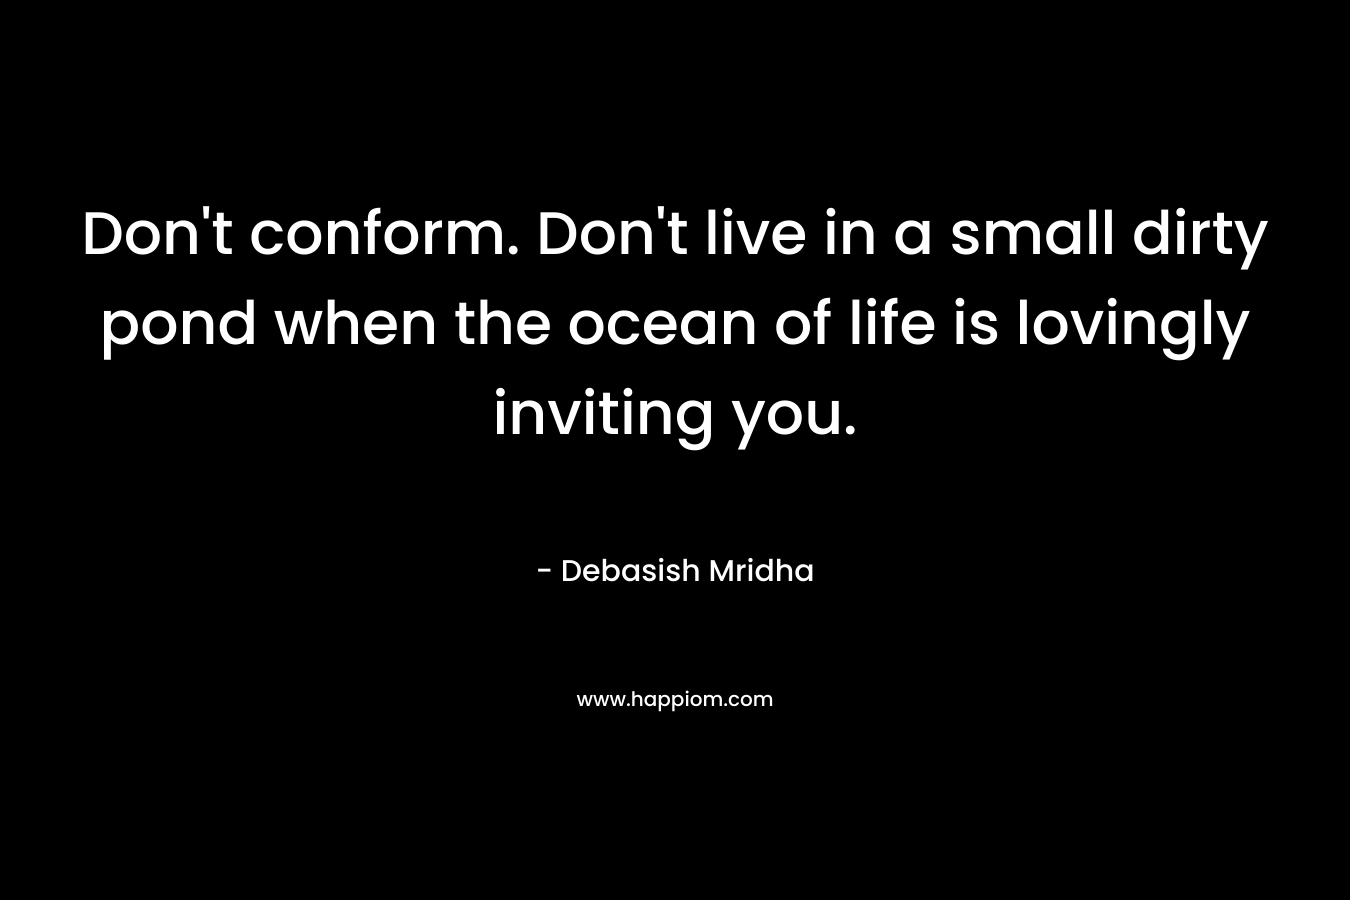 Don’t conform. Don’t live in a small dirty pond when the ocean of life is lovingly inviting you. – Debasish Mridha